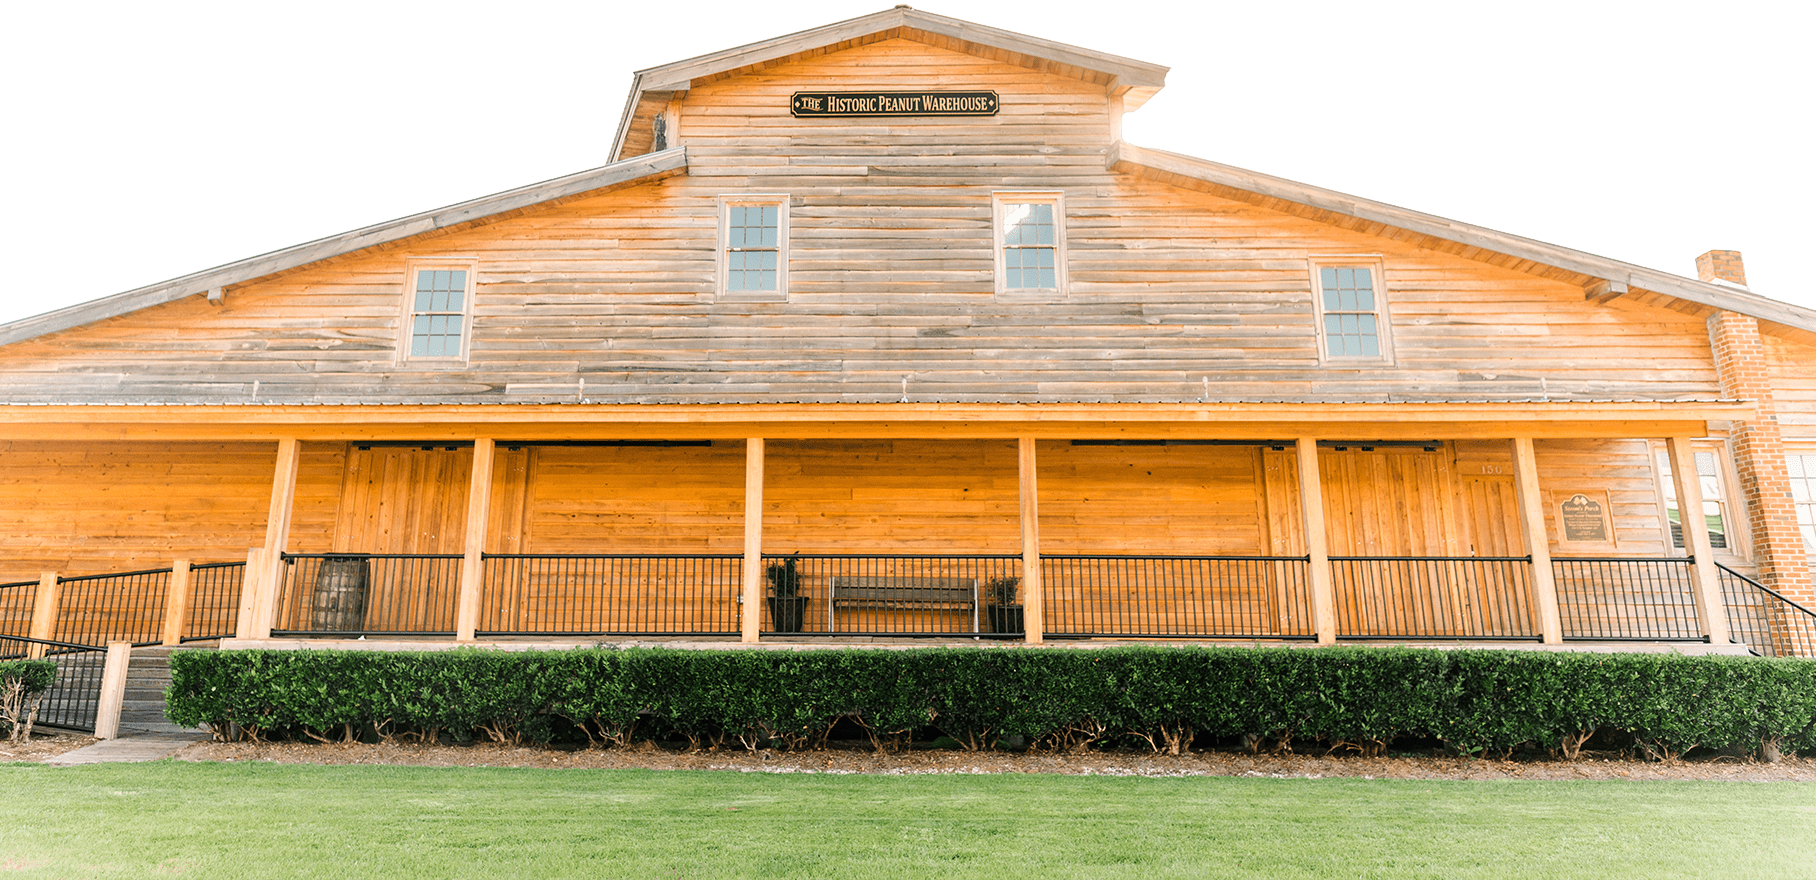 Large wooden building with a long porch